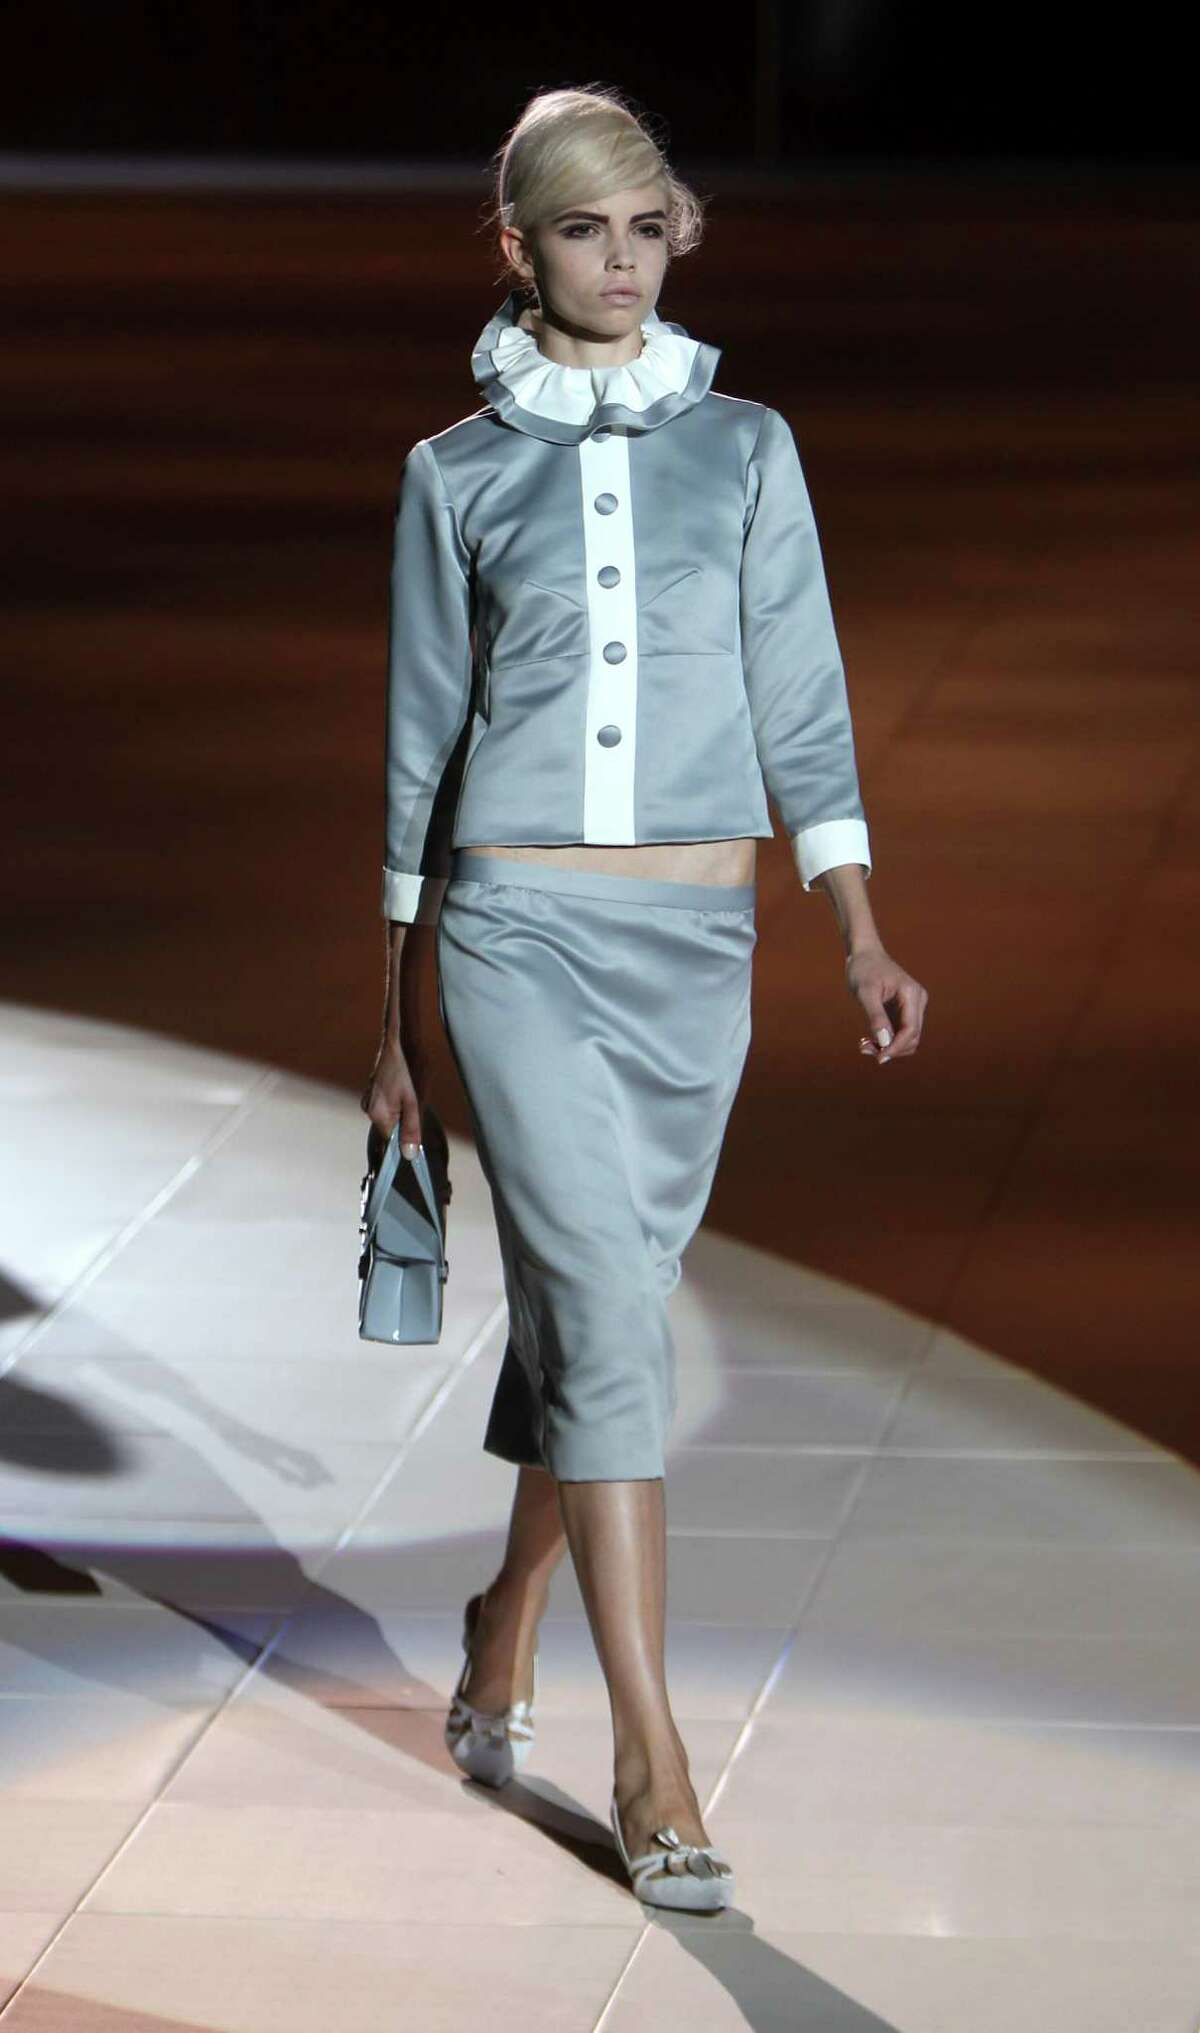 The Marc Jacobs Spring 2013 collection is modeled.